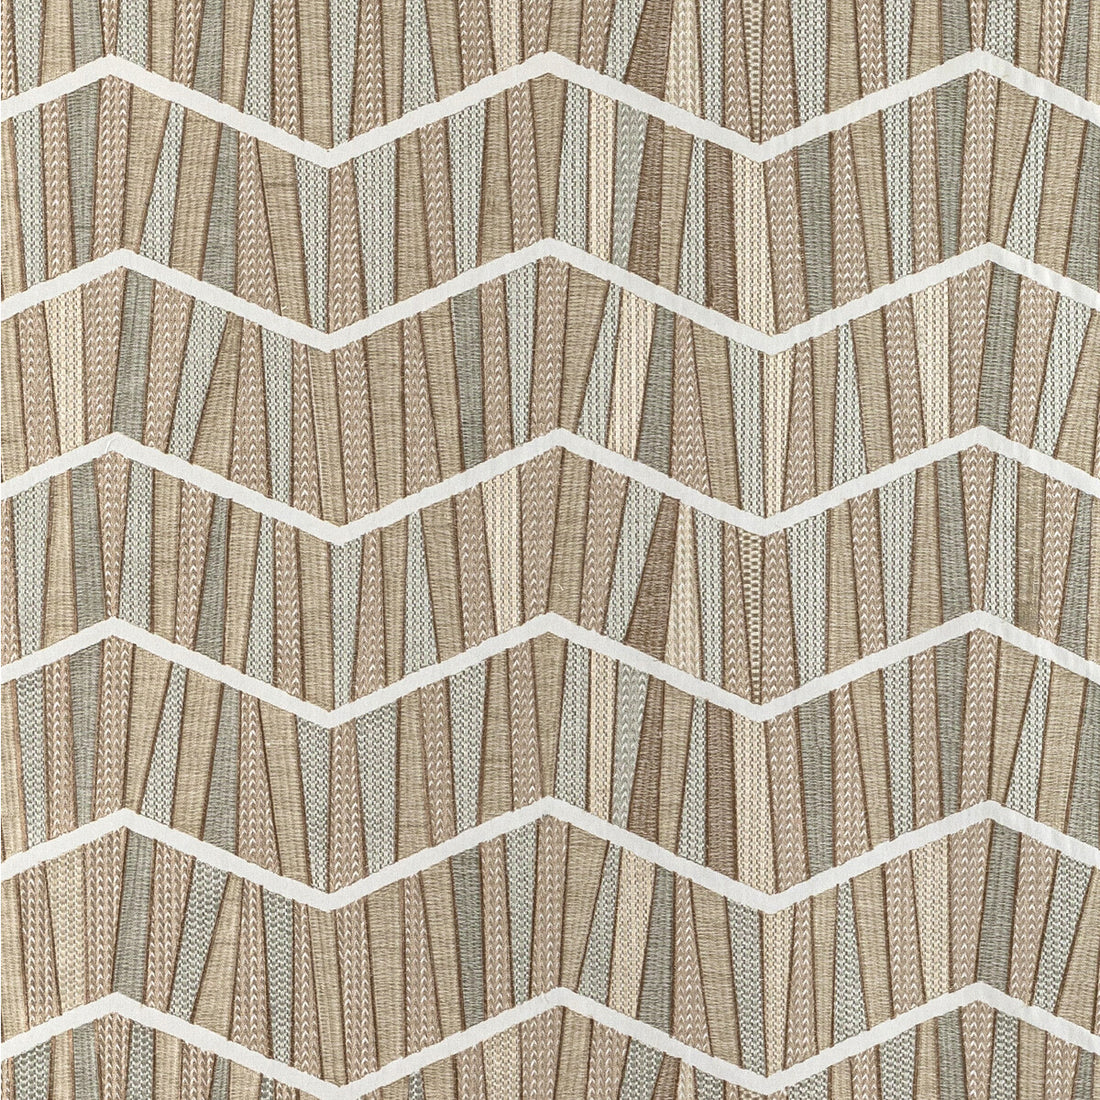 Right Angles fabric in champagne color - pattern 36352.16.0 - by Kravet Couture in the Modern Luxe III collection